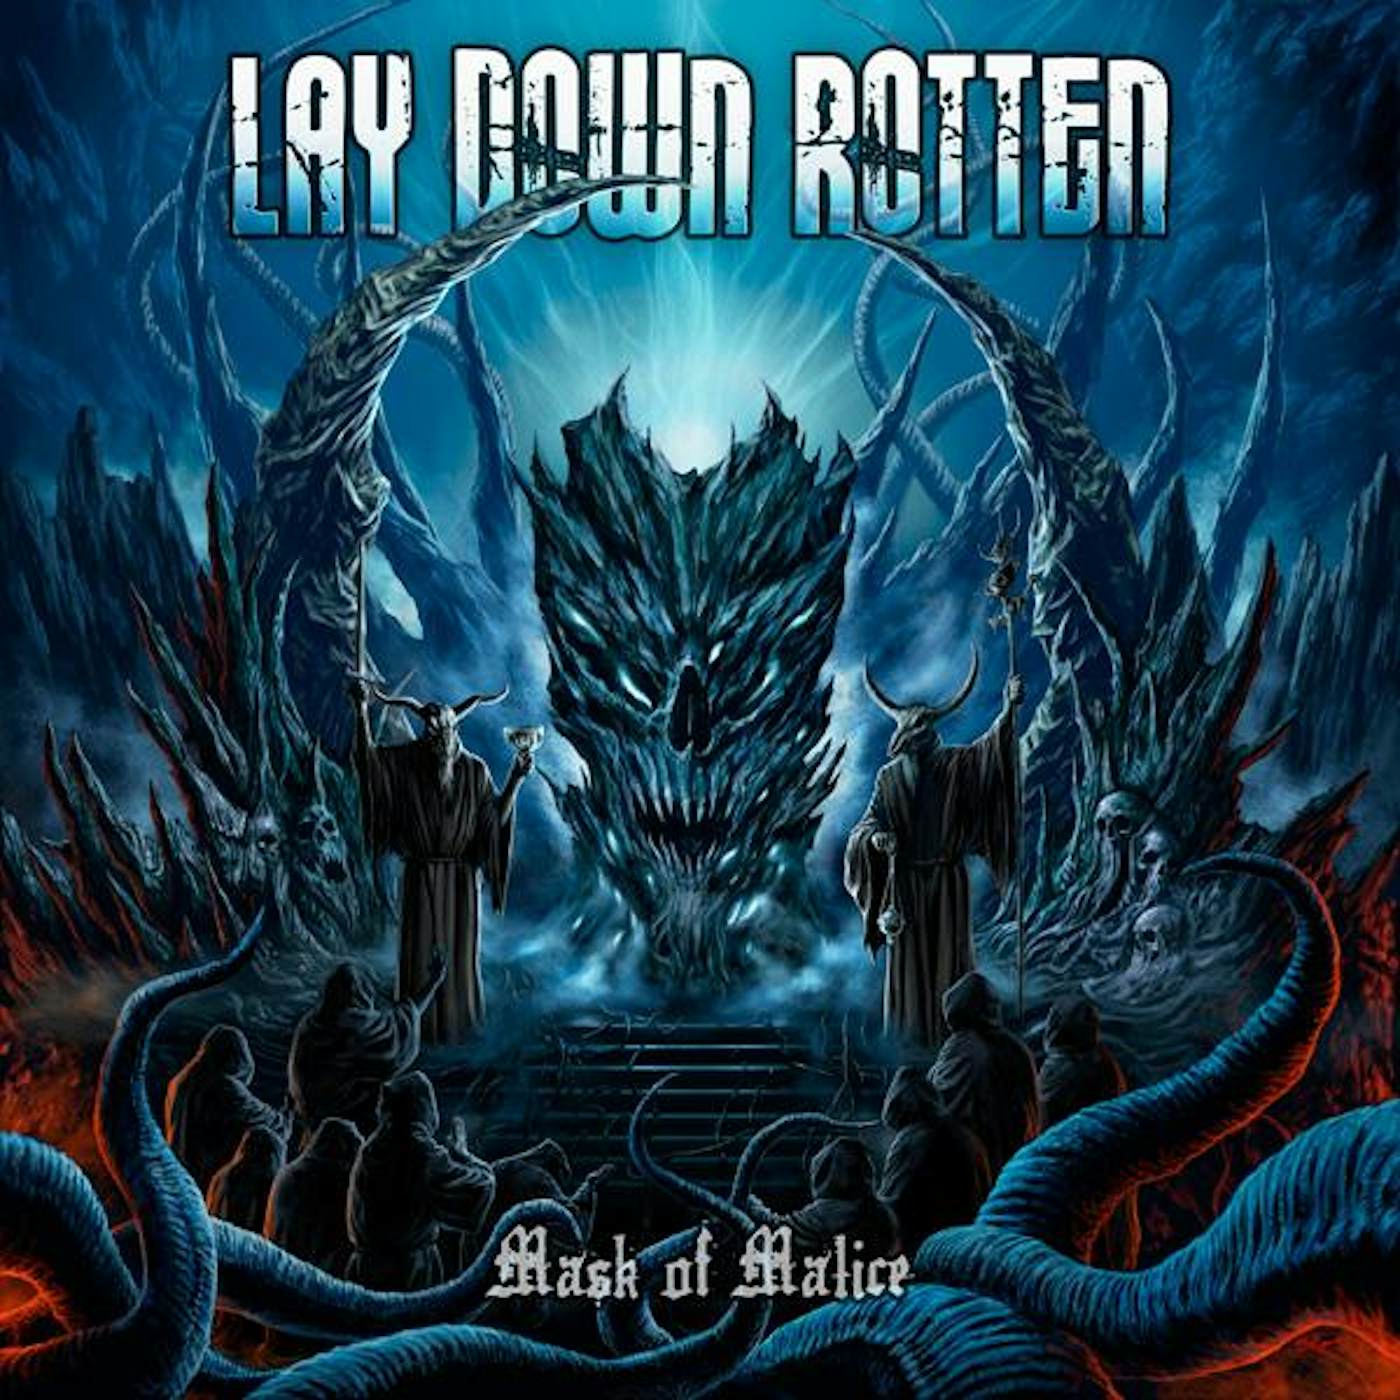 Lay Down Rotten "Mask of Malice" CD